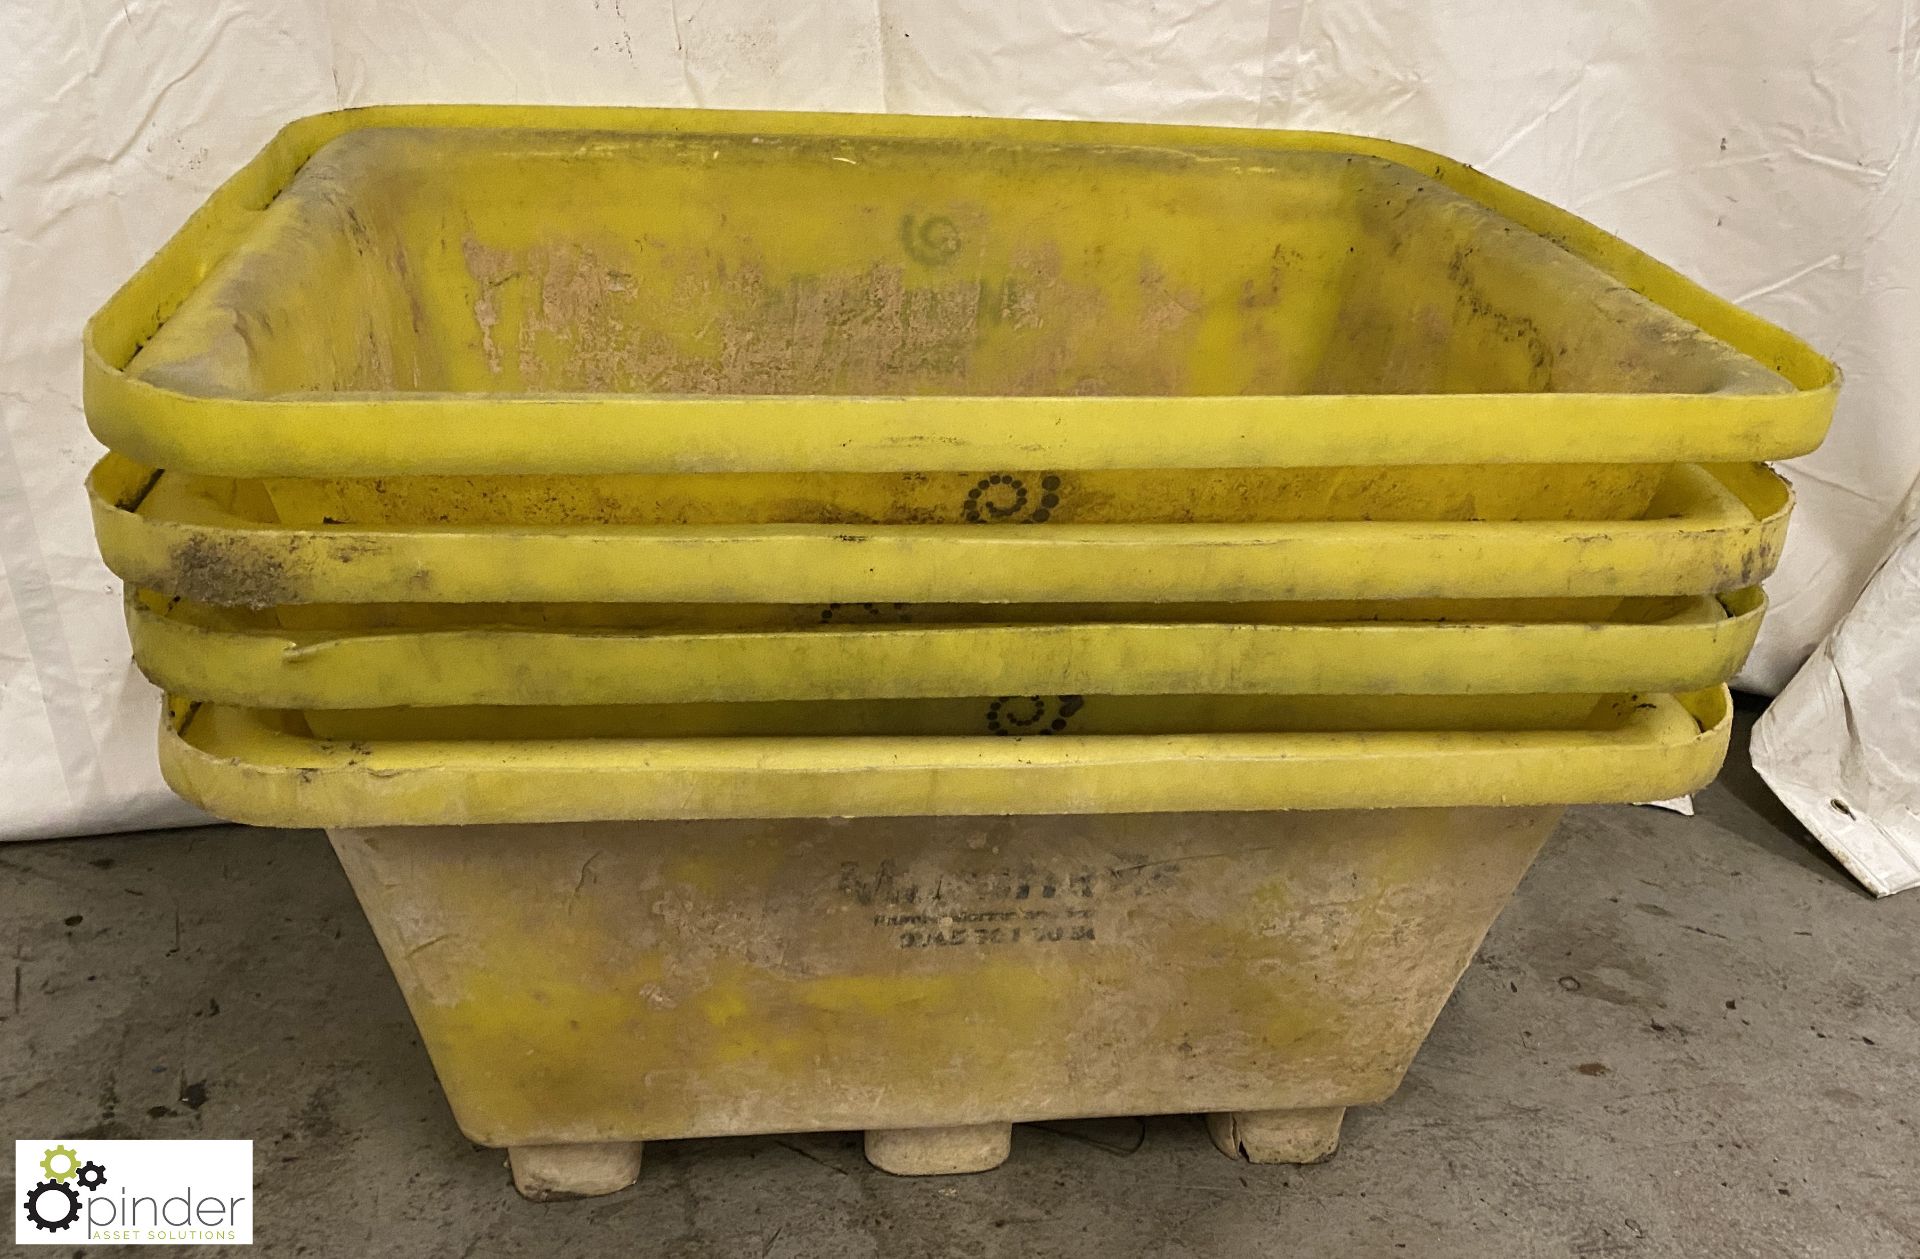 4 plastic Mixing Tubs, 1230mm x 920mm x 550mm - Image 2 of 4